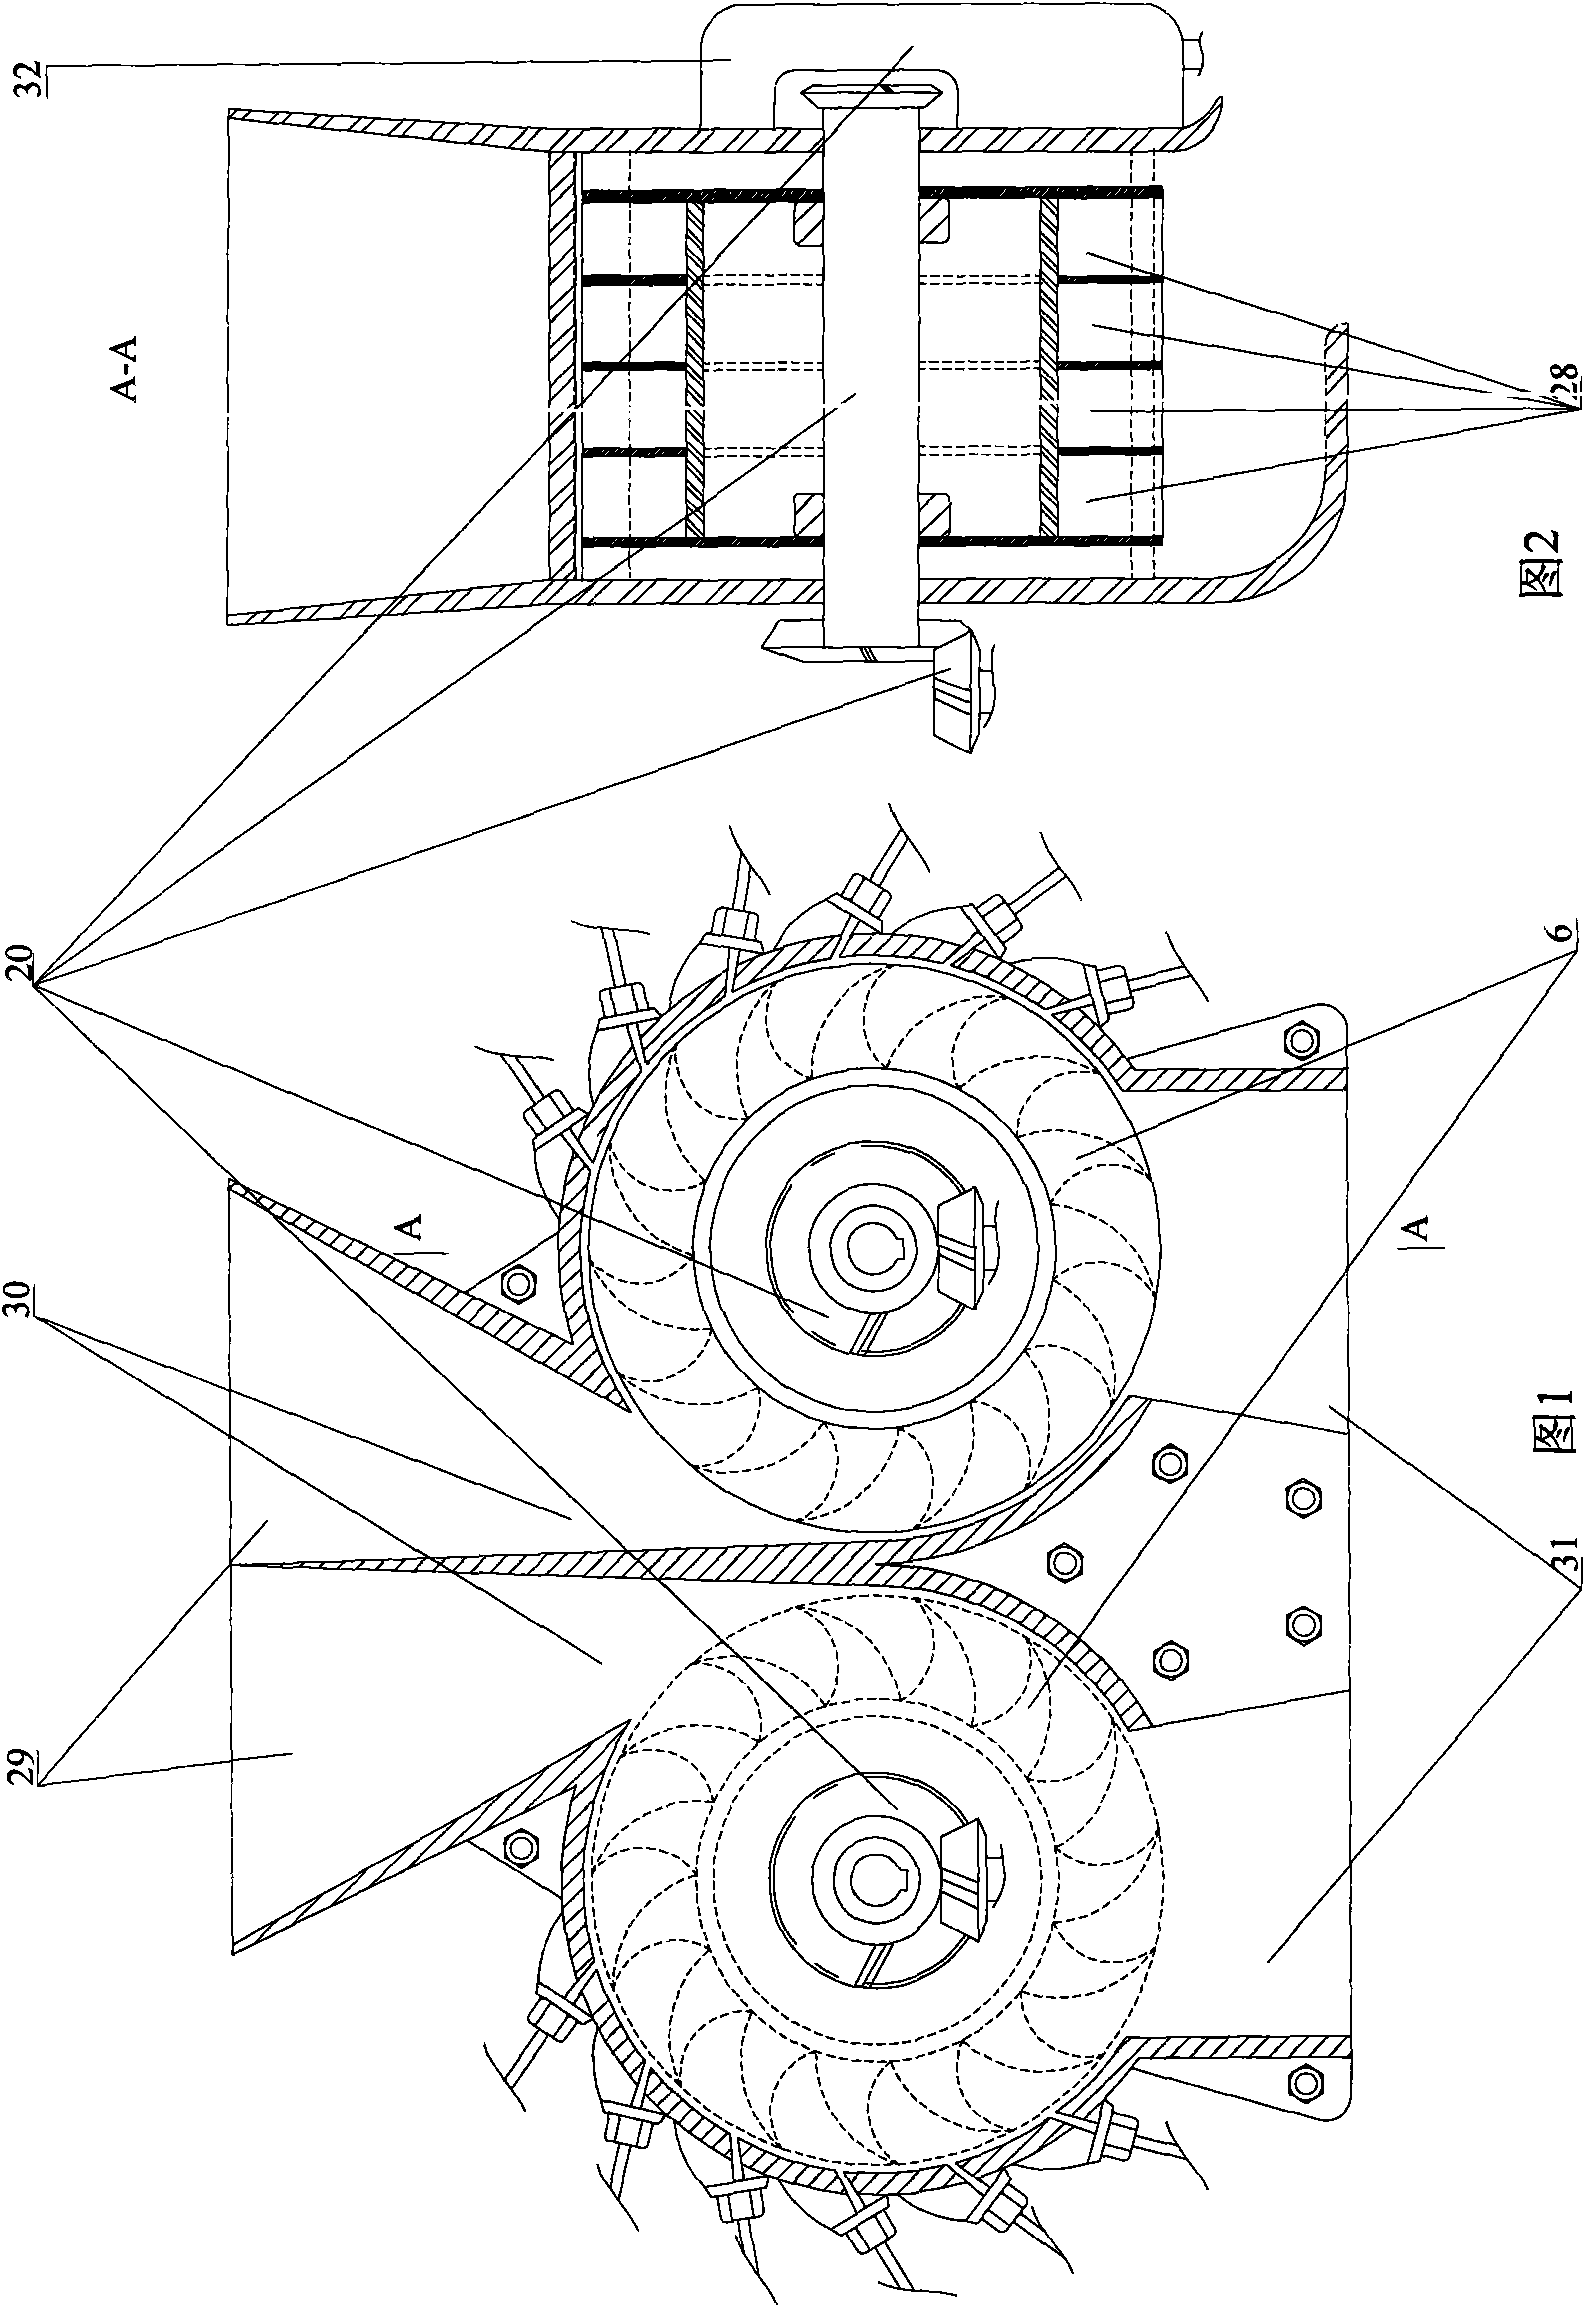 Wind air engine and automobile